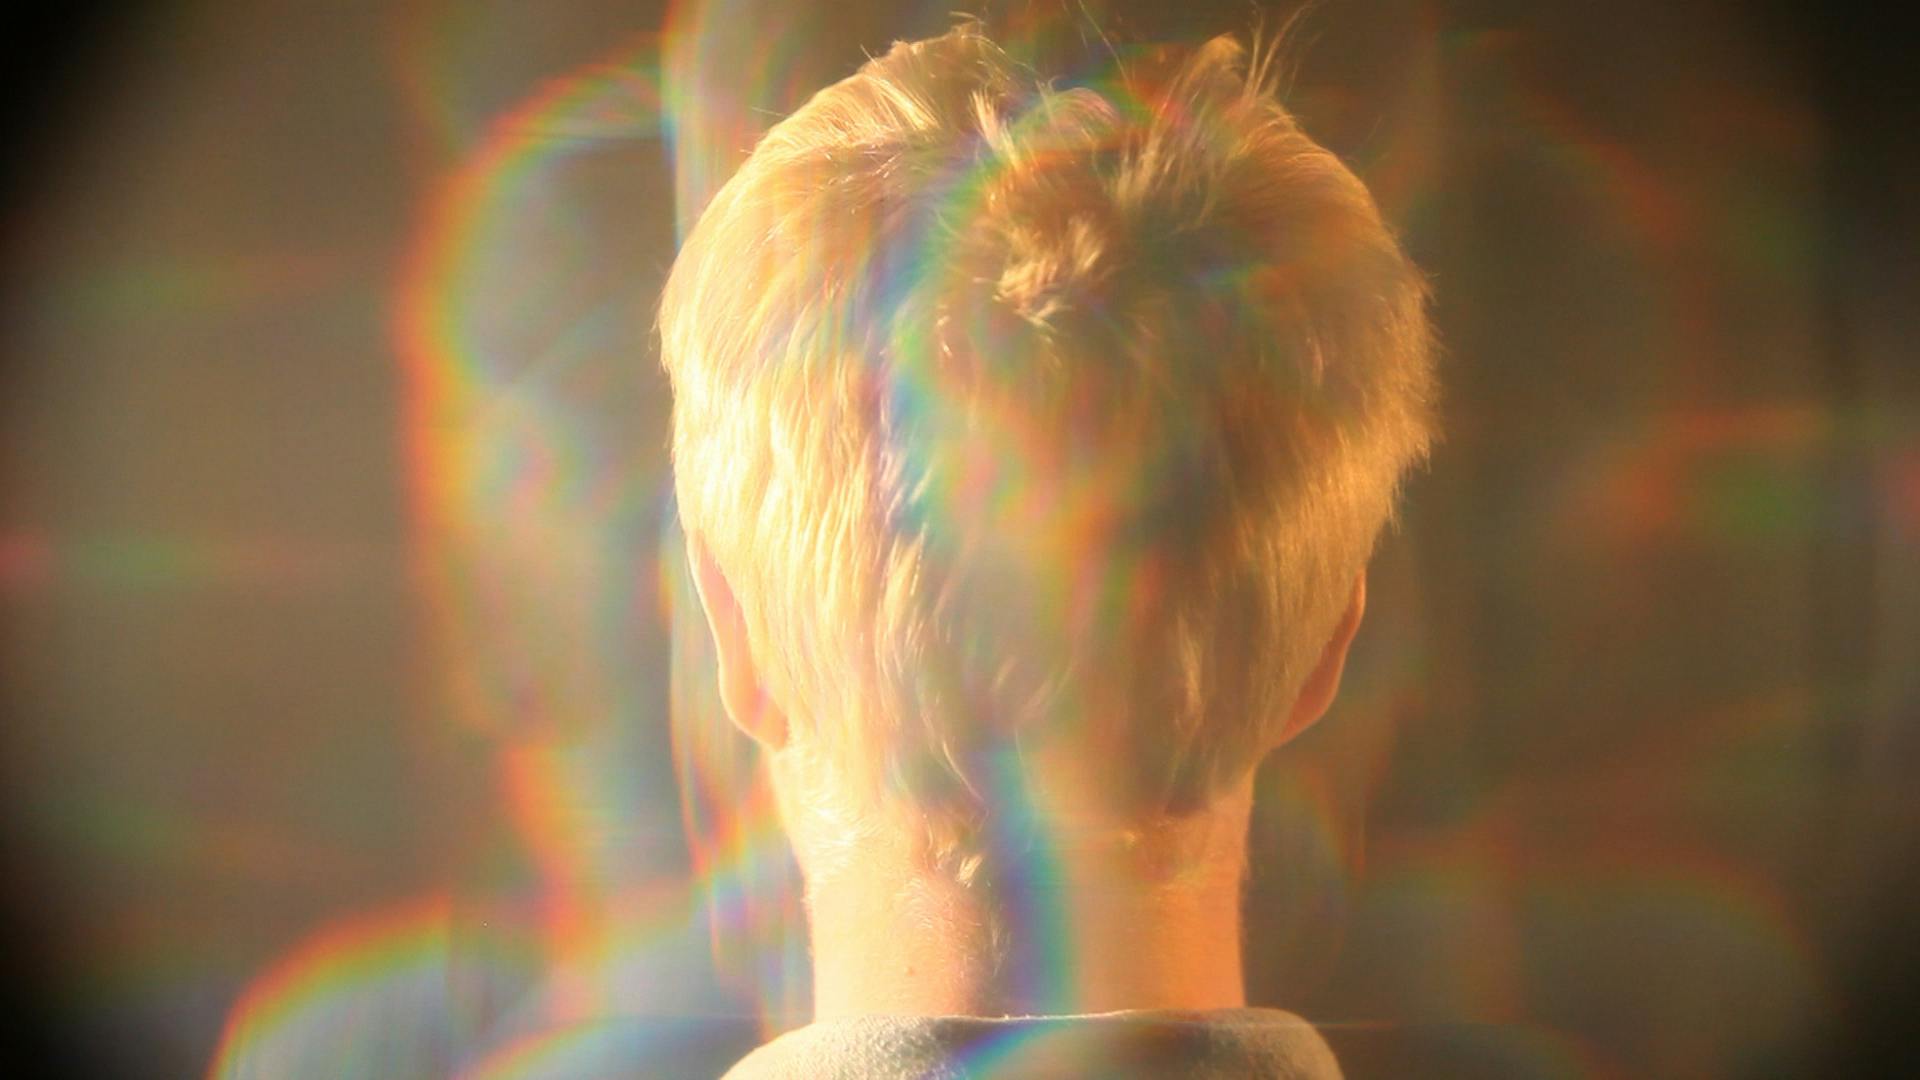 An image depicting the back of a person’s head, with short blonde hair. The person is cast in warm light with rainbows refracting throughout the image. 